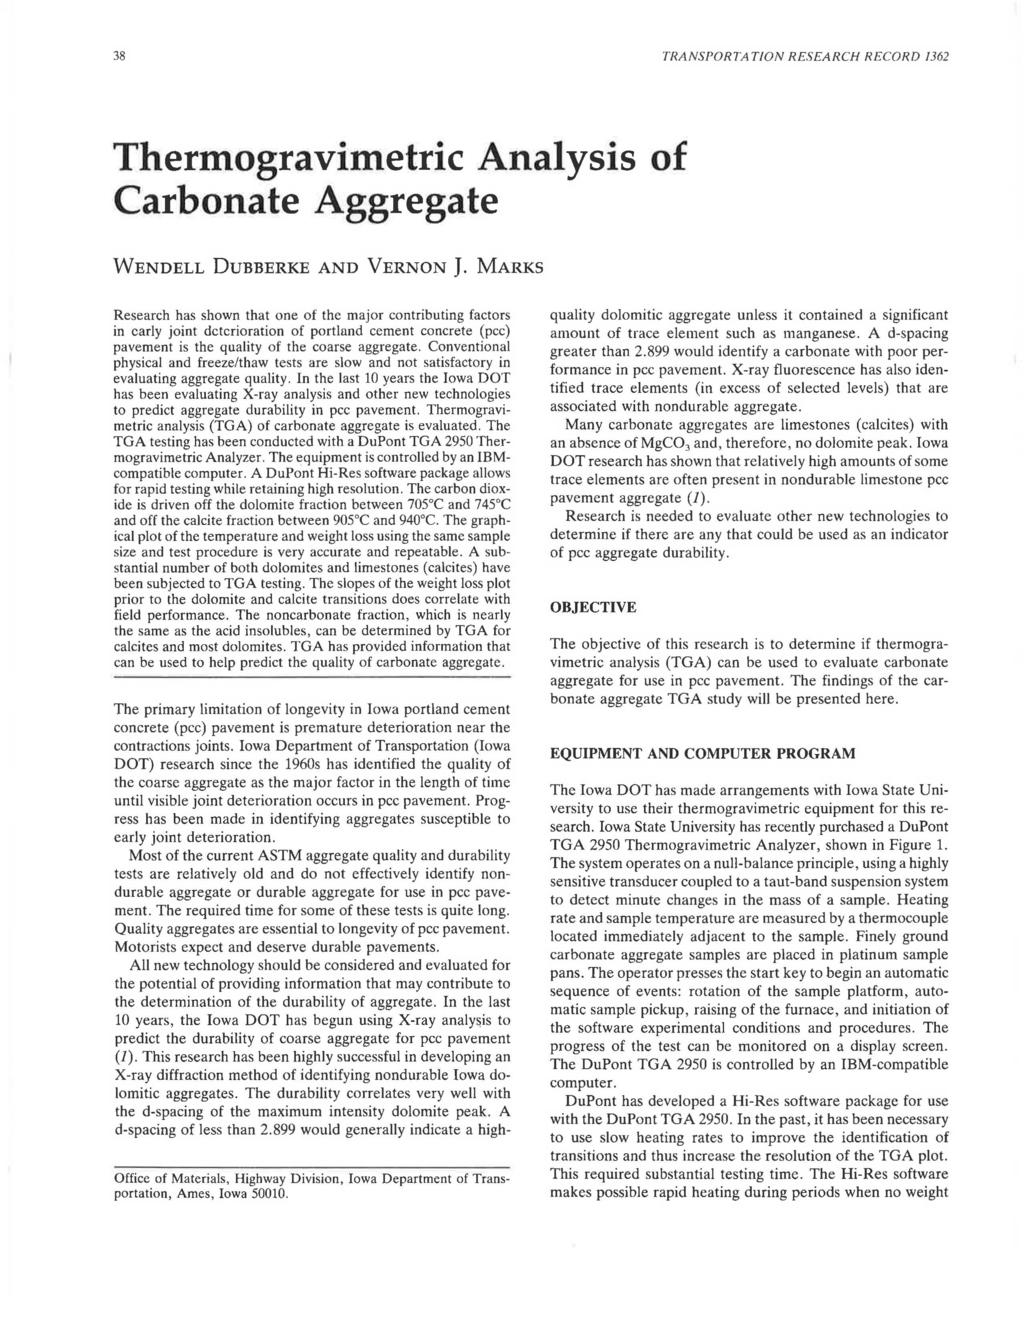 38 TRANSPORTATION RESEARCH RECORD 1362 Thermogravimetric Analysis of Carbonate Aggregate WENDELL DuBBERKE AND VERNON J.